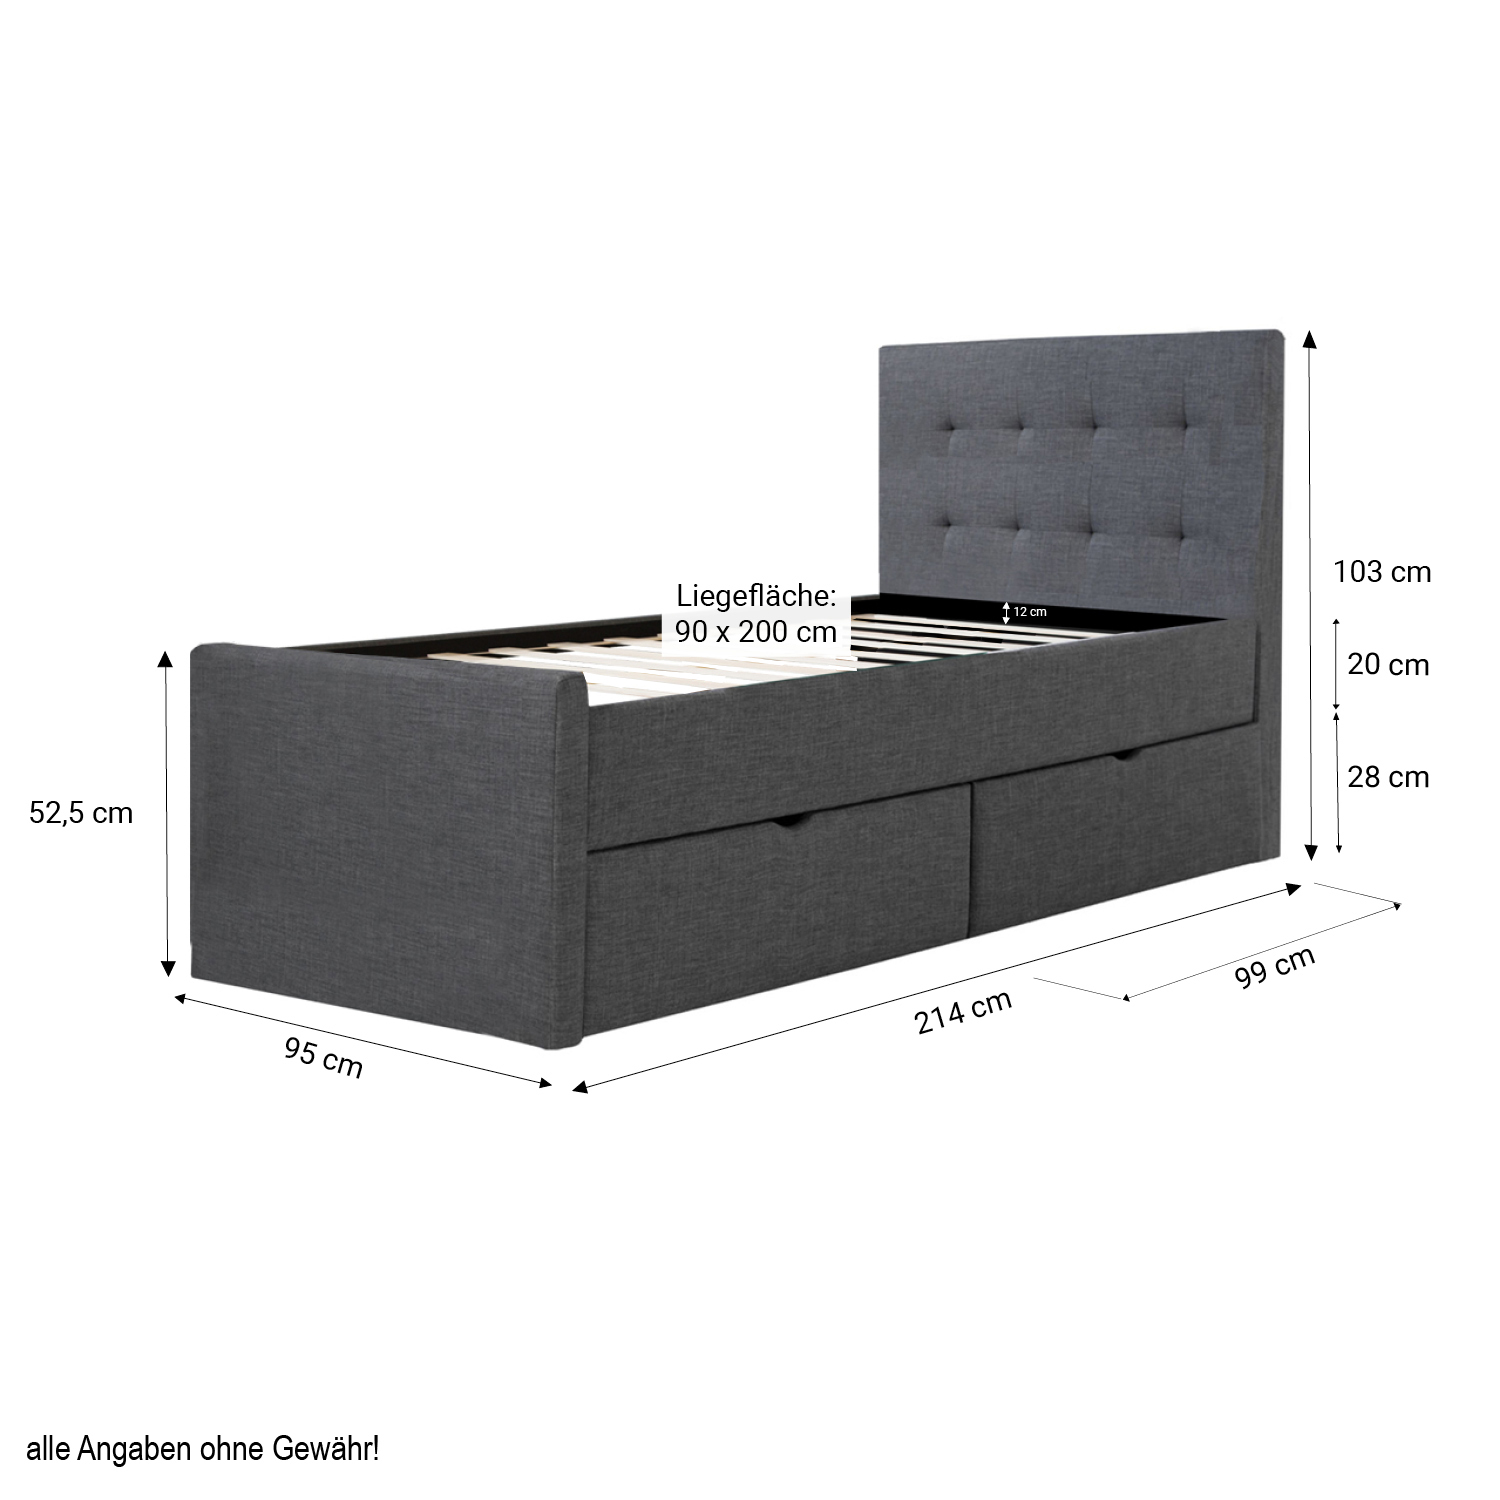 Upholstered Bed Frame Single Bed 90x200 Anthracite Platform Bed Fabric Headboard 2 Drawers